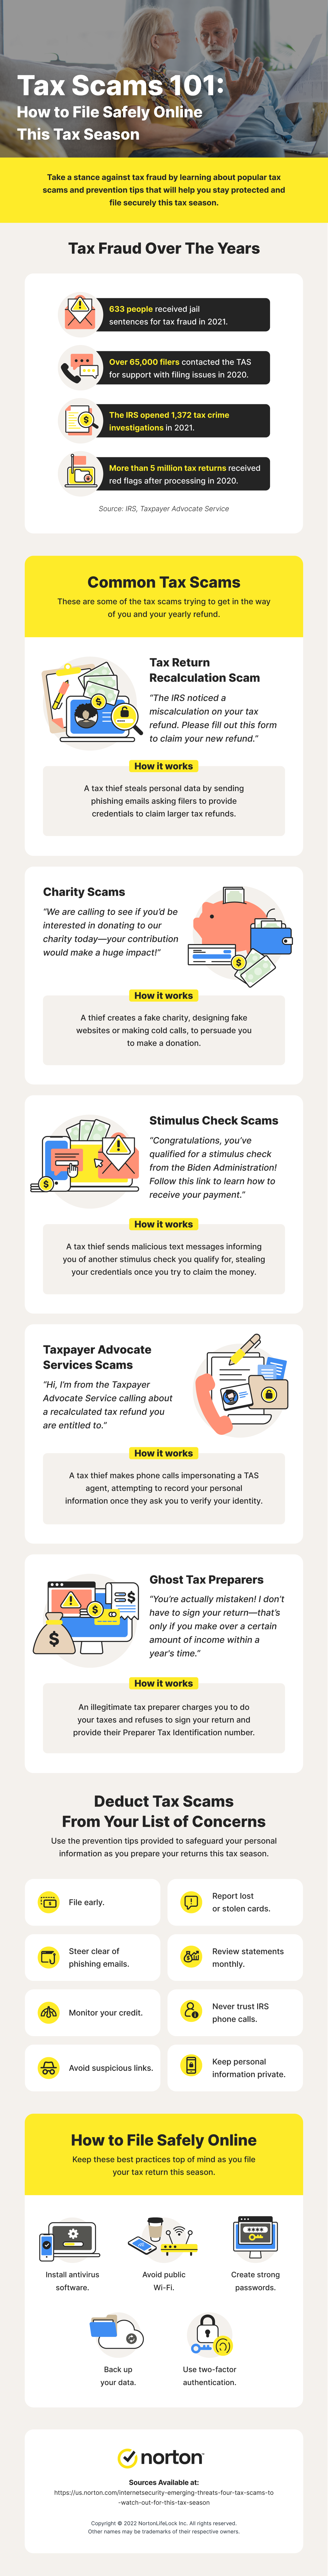 An infographic explores the impact of tax scams on everyday filers as well as how to file securely during tax season. 